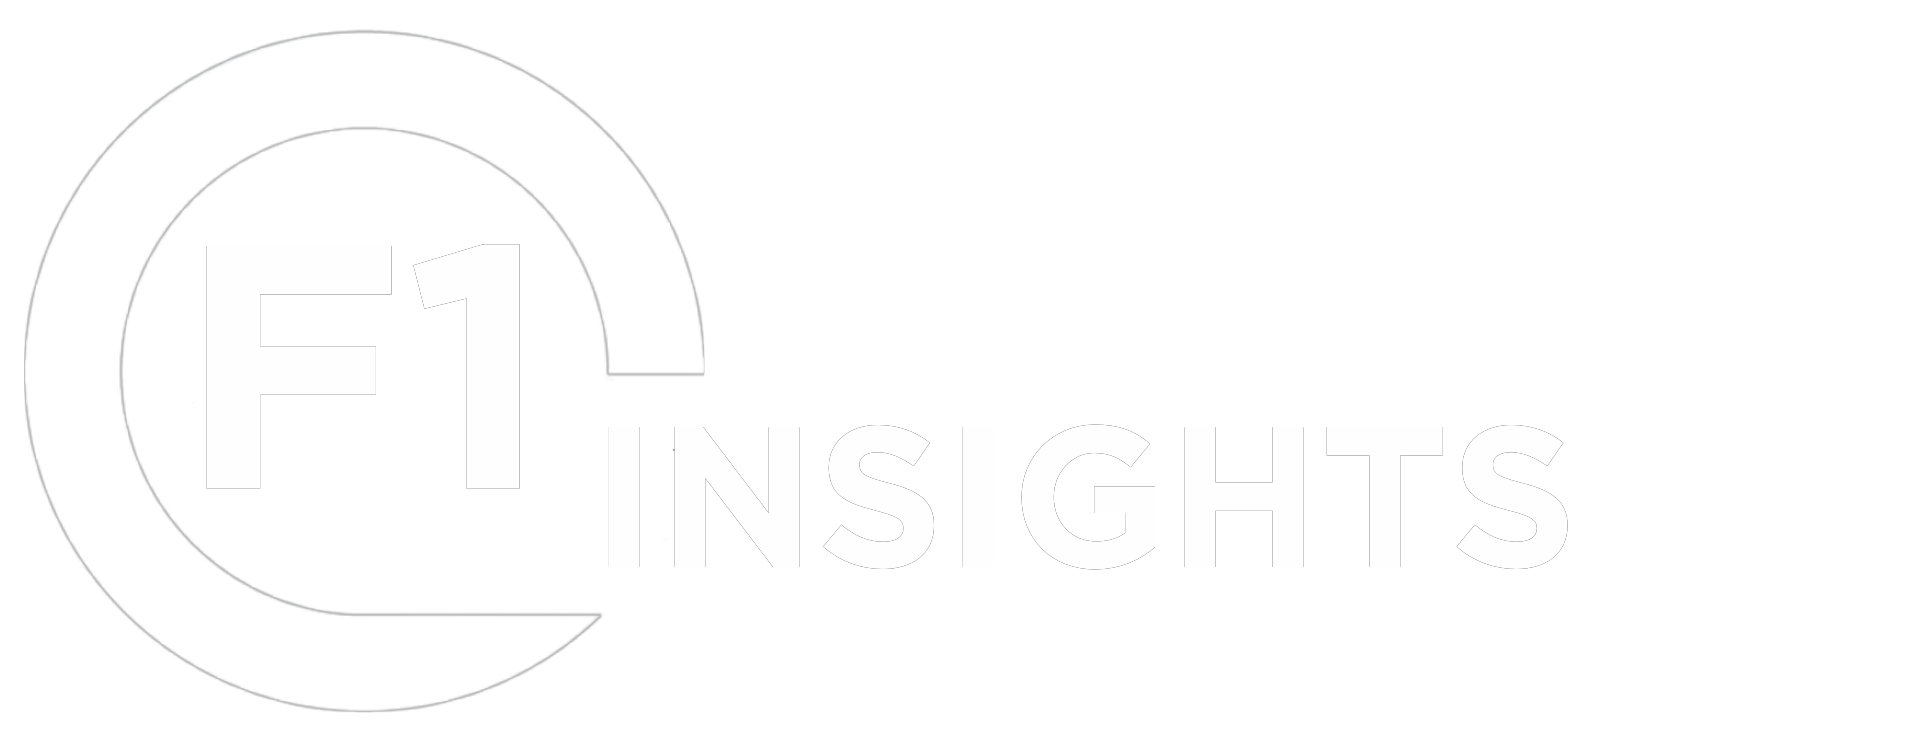 F1 Insights and Business Intelligence